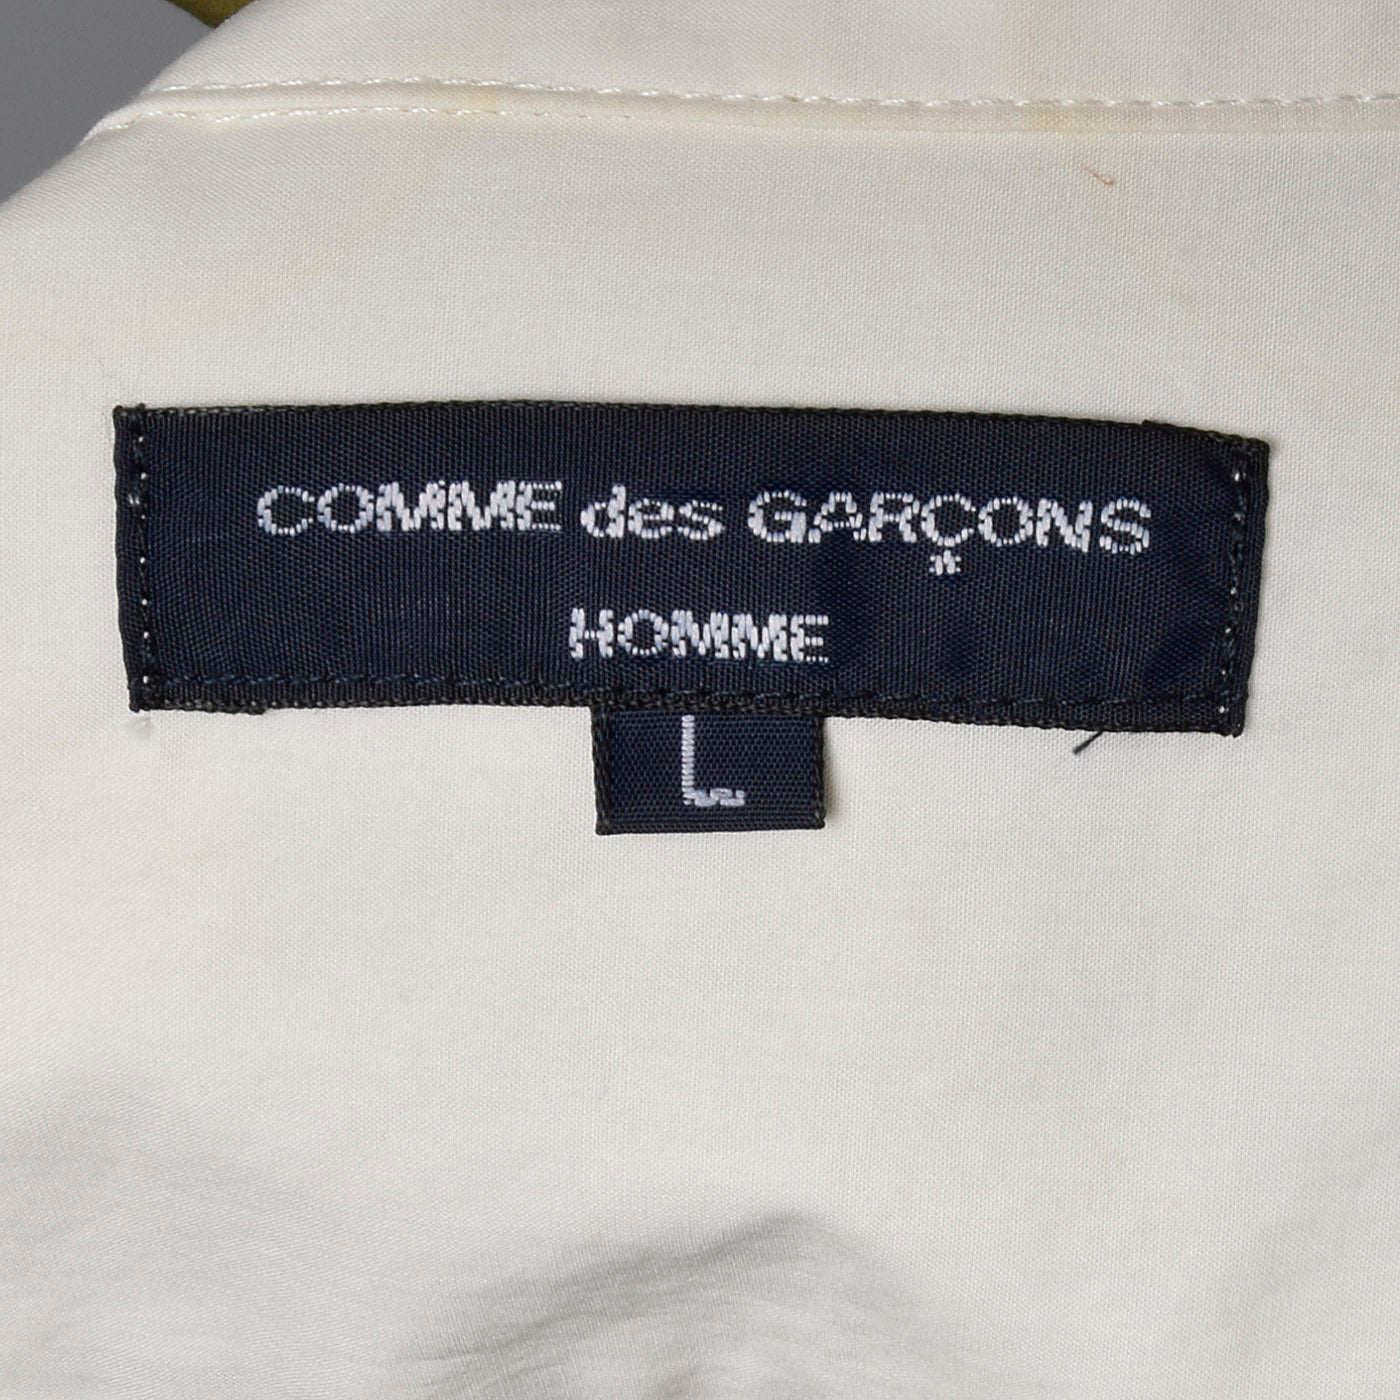 2000s Comme des Garcons Two Tone Green and White Button Down Shirt